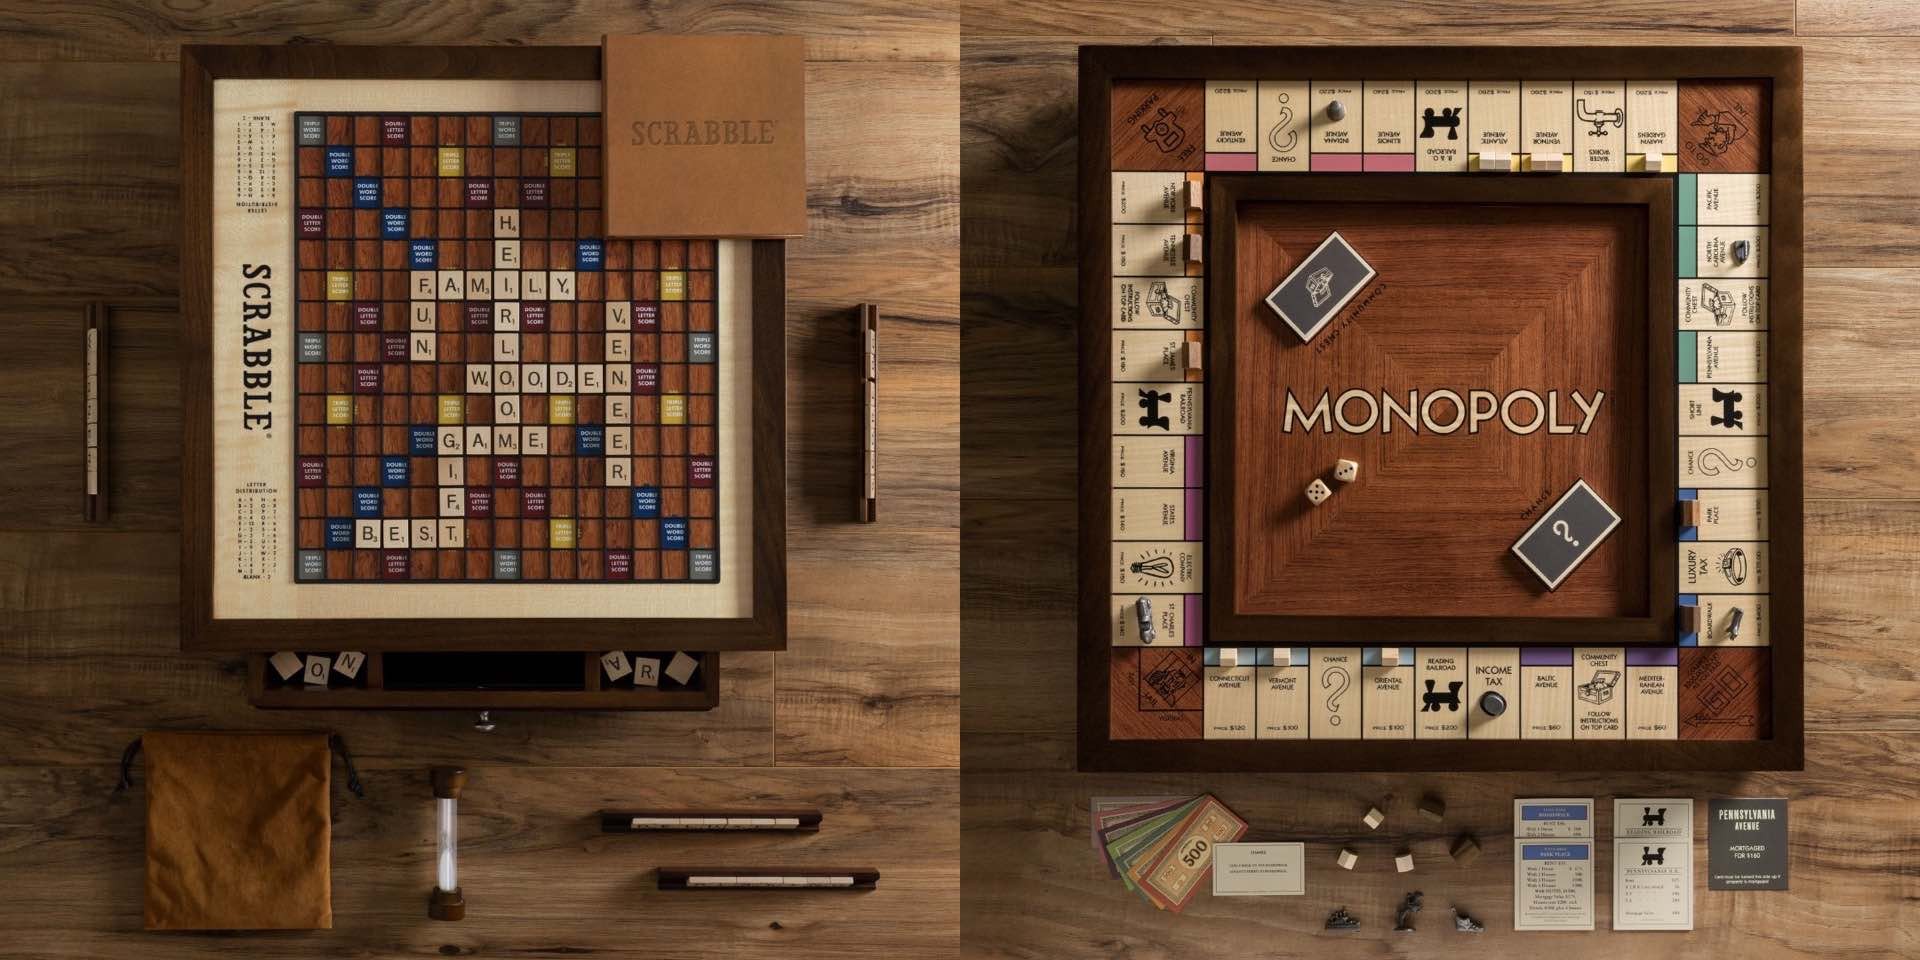 Heirloom-edition Scrabble and Monopoly board games. ($350 each)